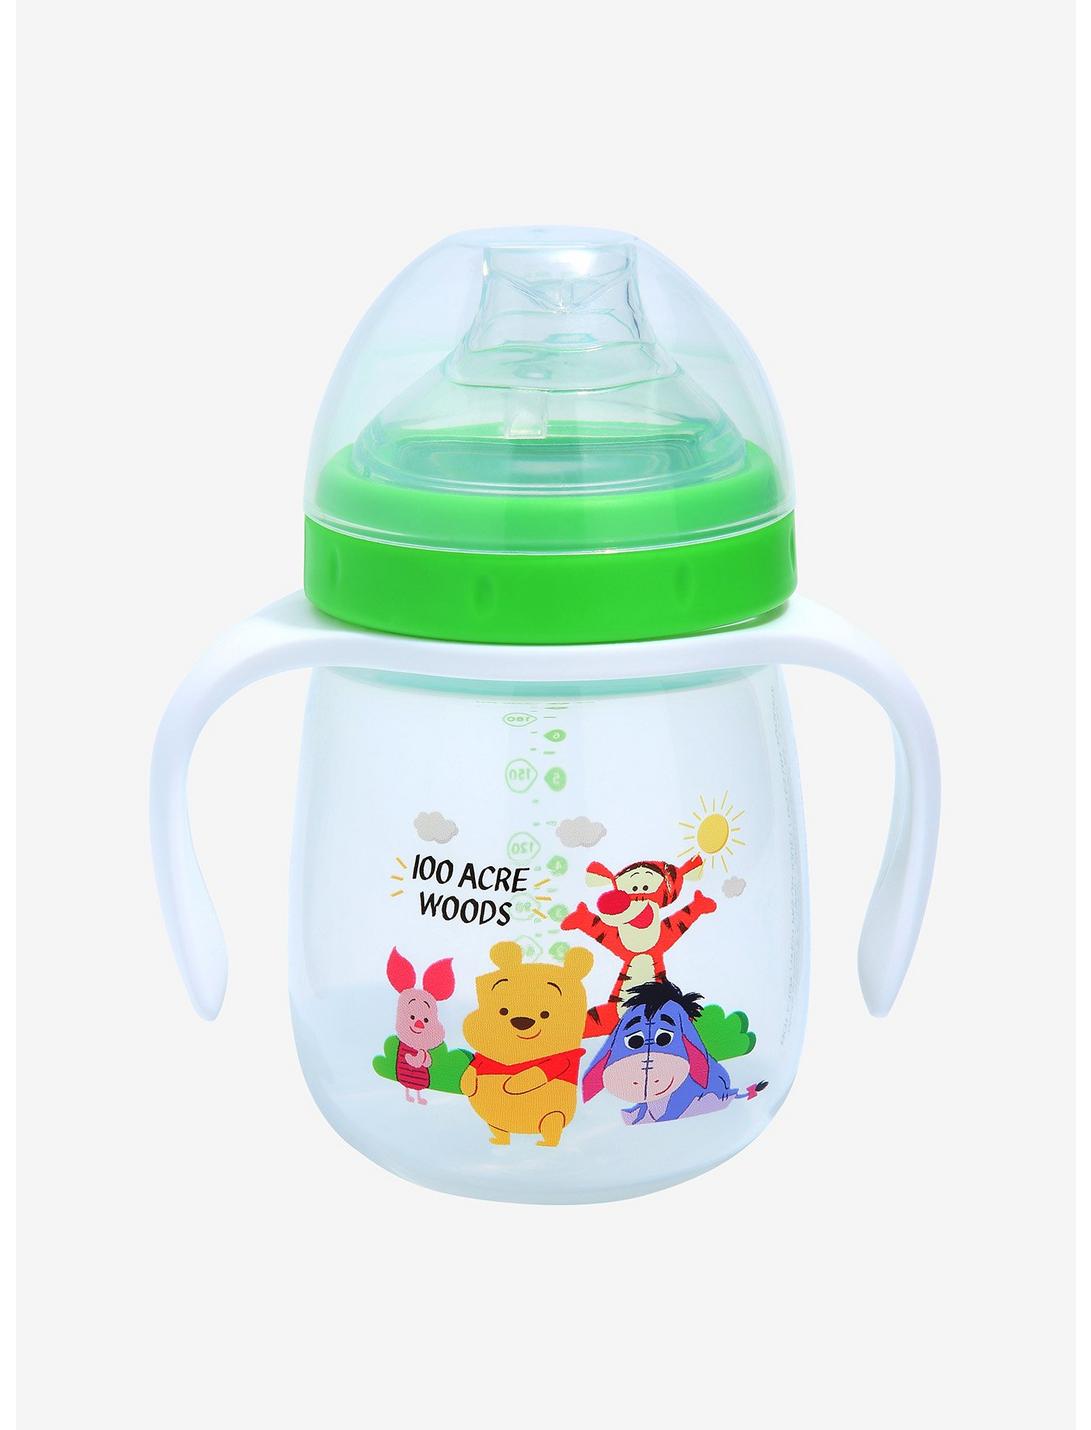 Disney Winnie the Pooh 100 Acre Woods Sippy Cup - BoxLunch Exclusive, , hi-res